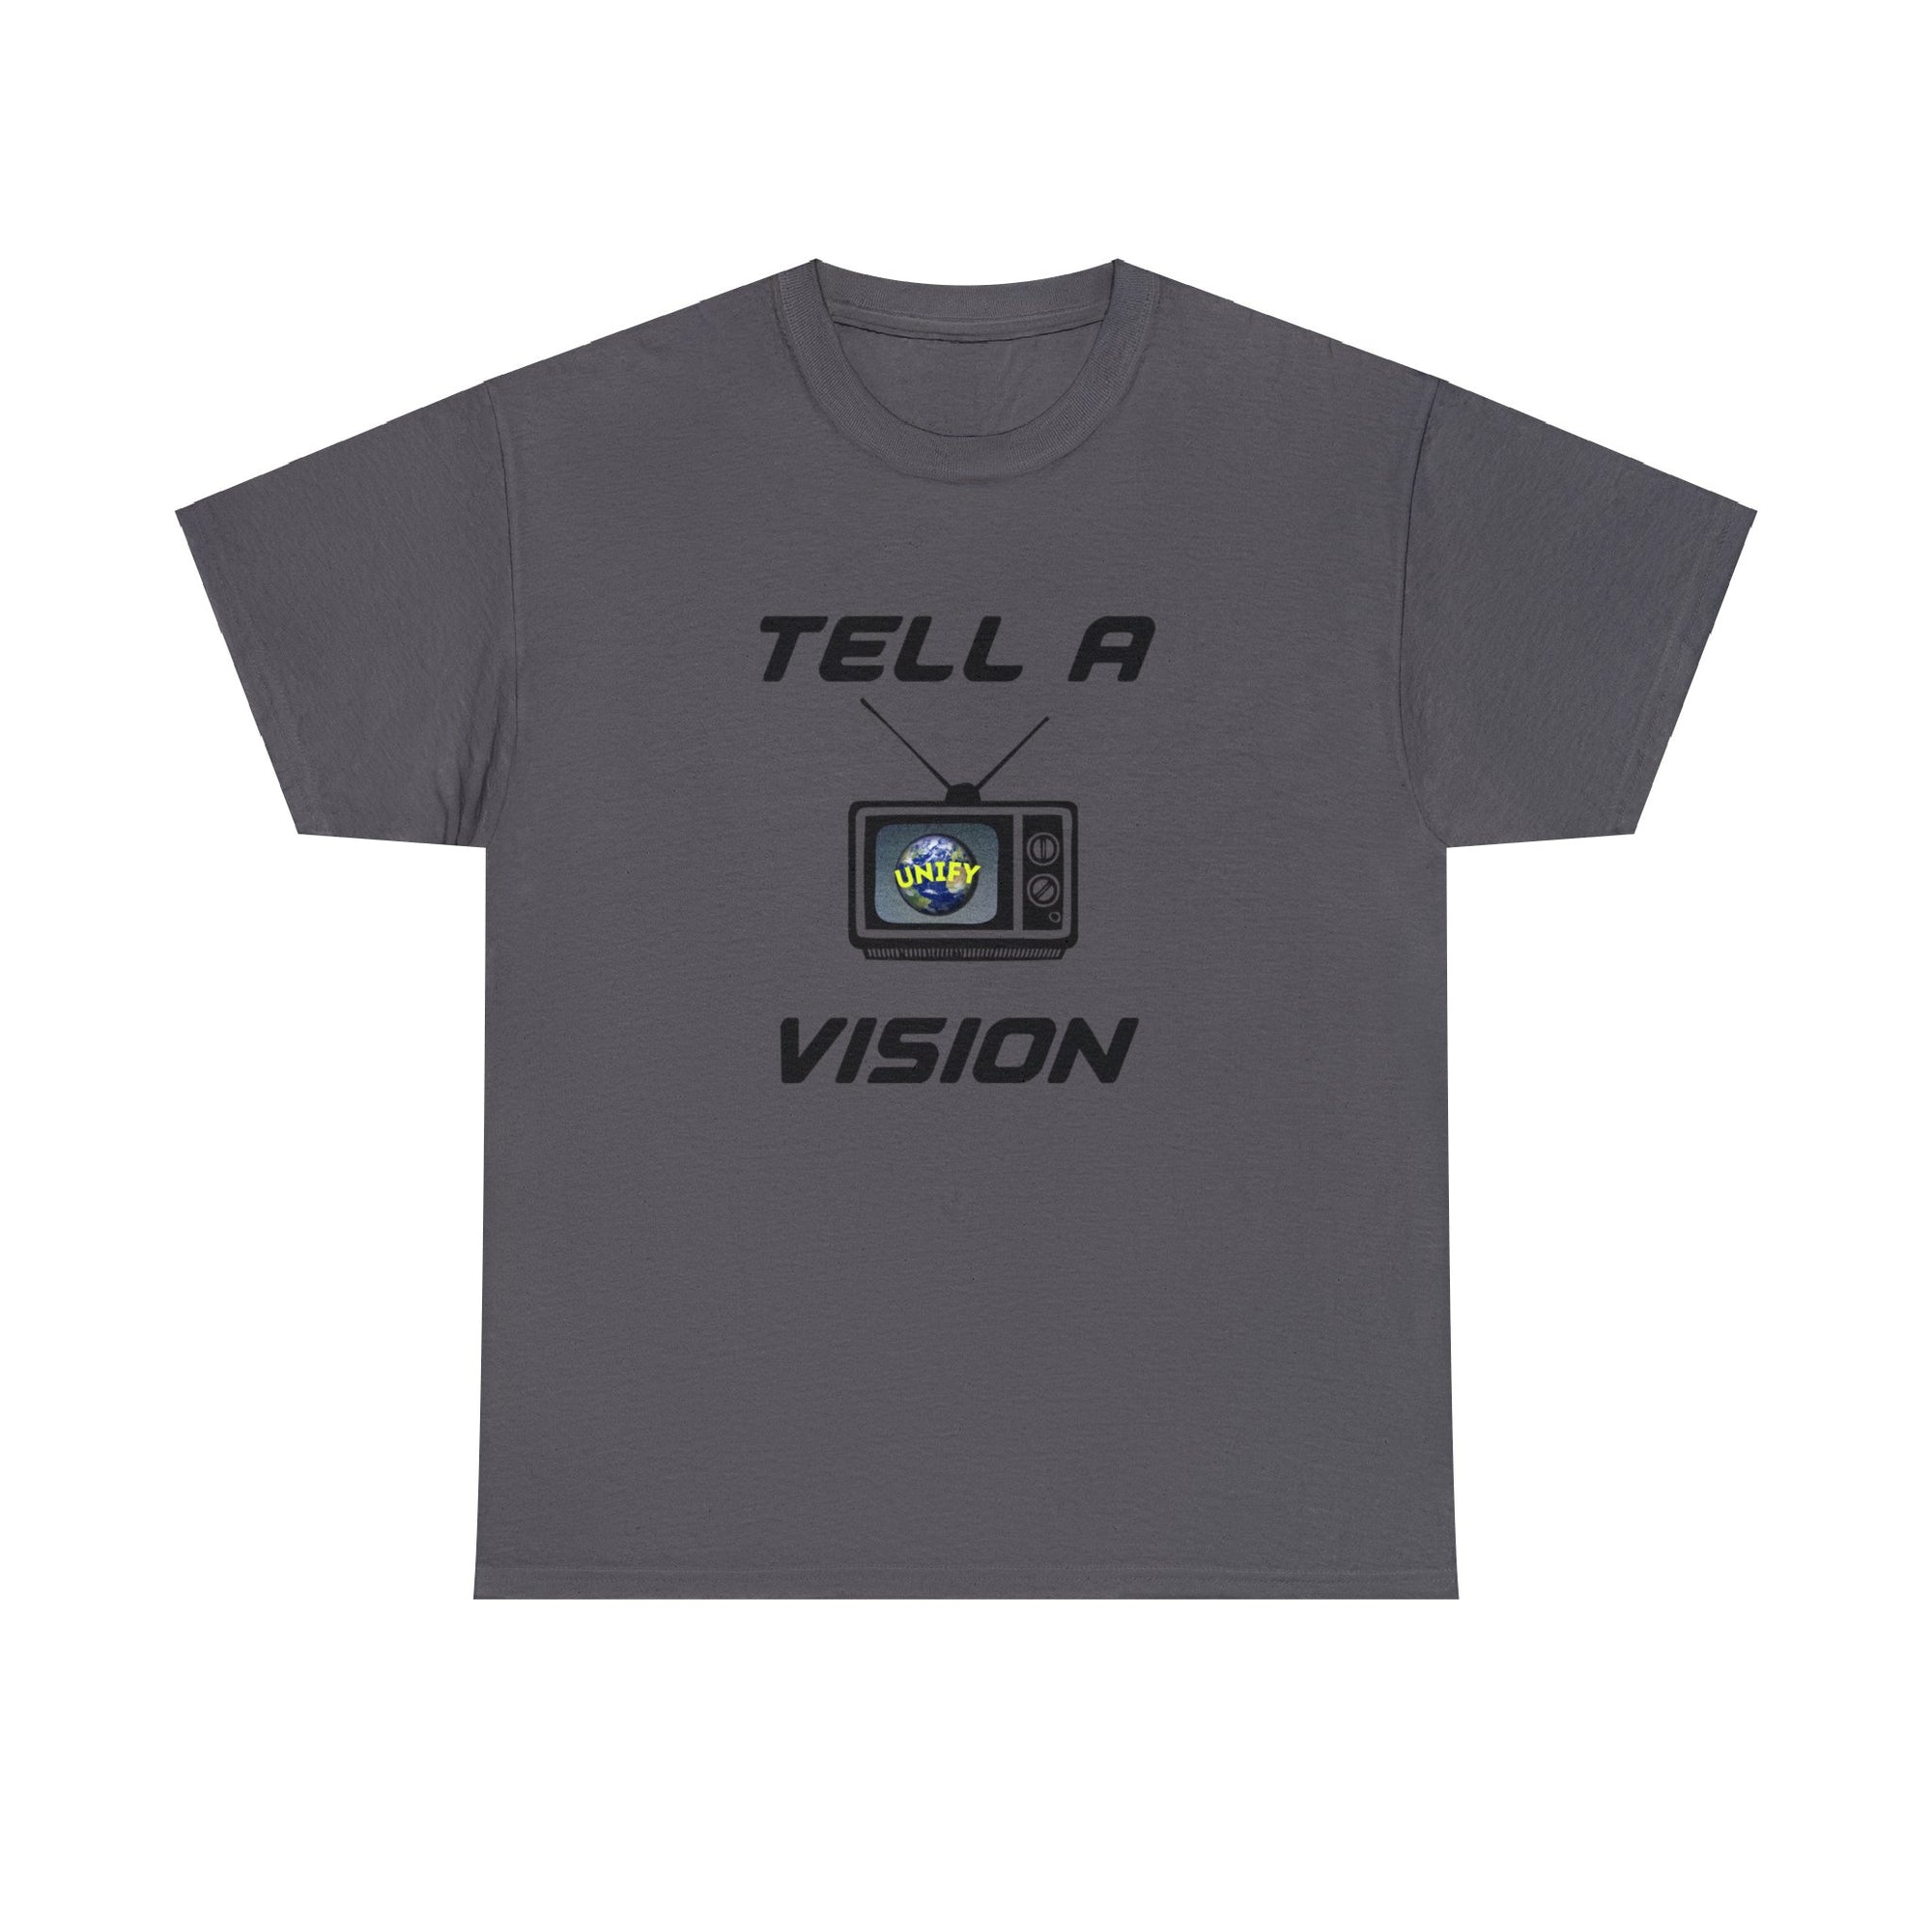 Tell a vision (television)